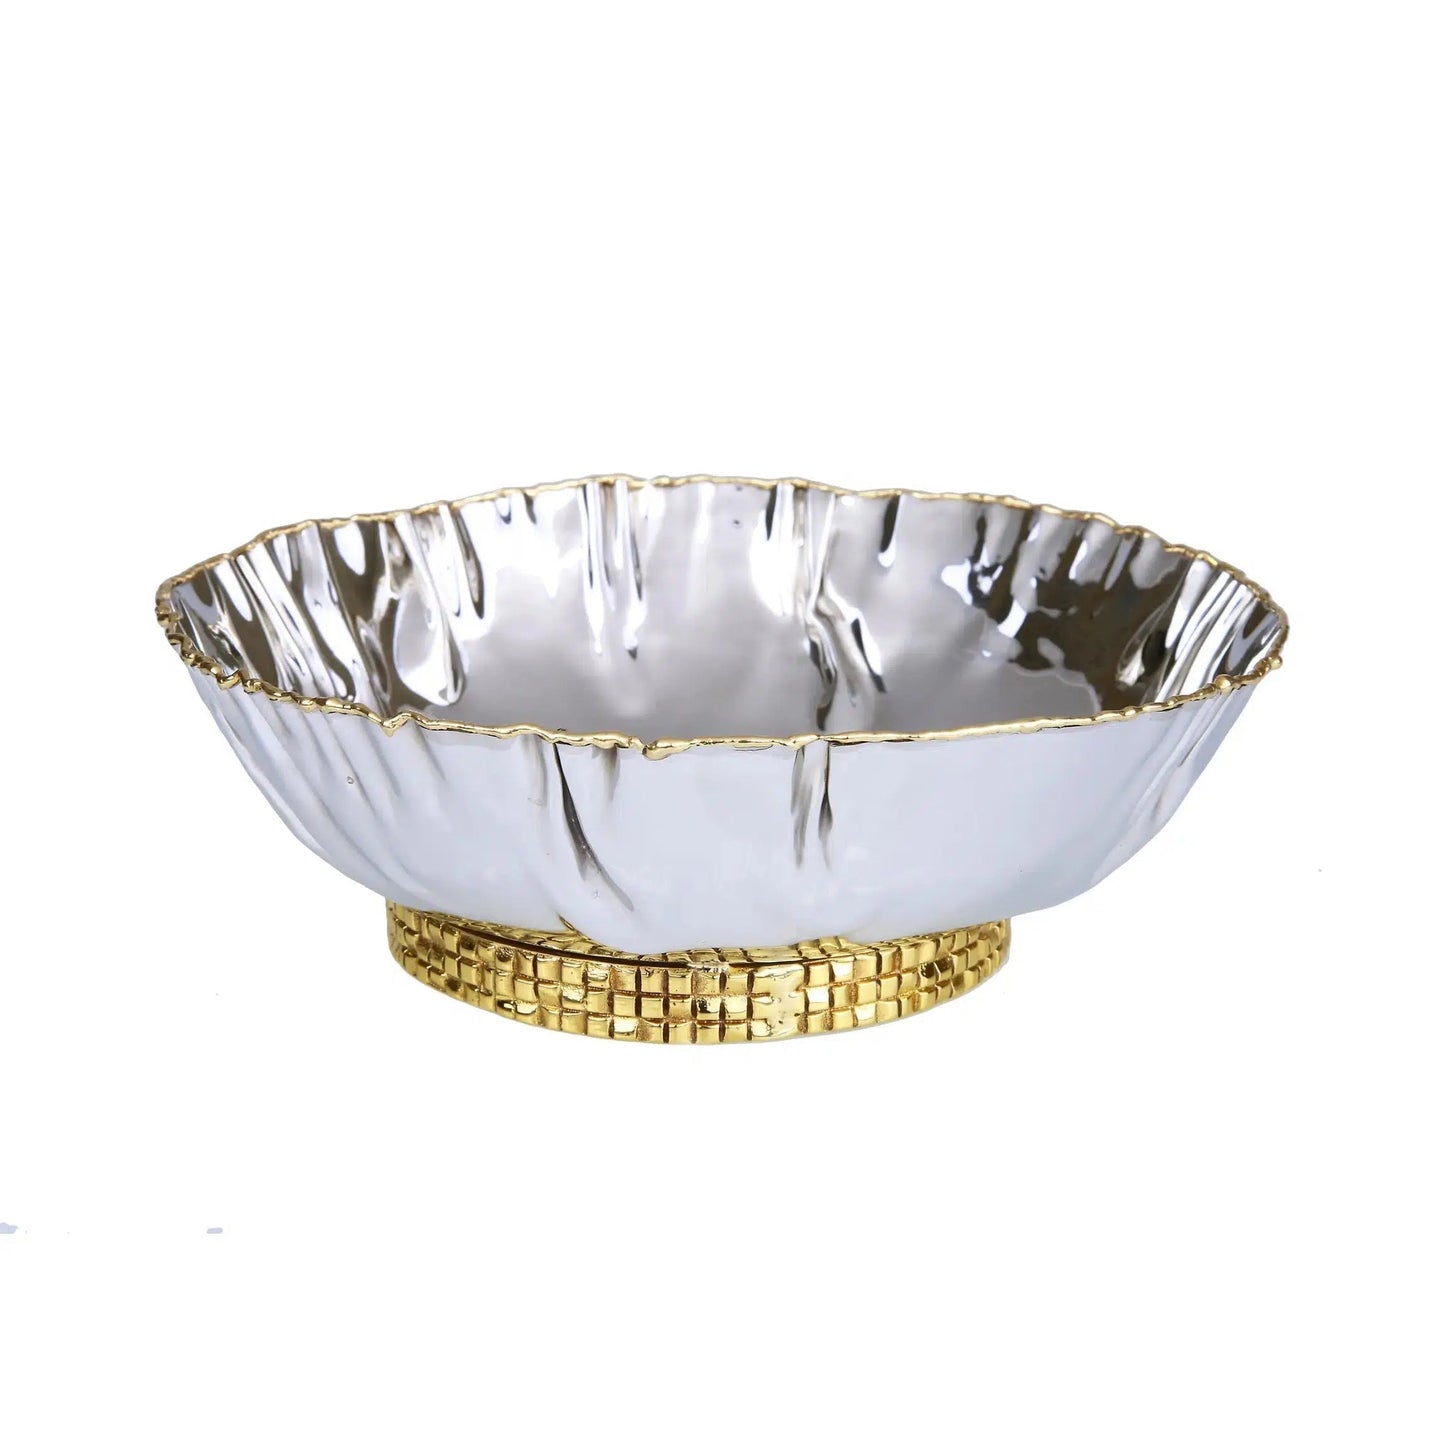 Salad Bowl - Gold/ Nickel Decorative Bowls High Class Touch - Home Decor 